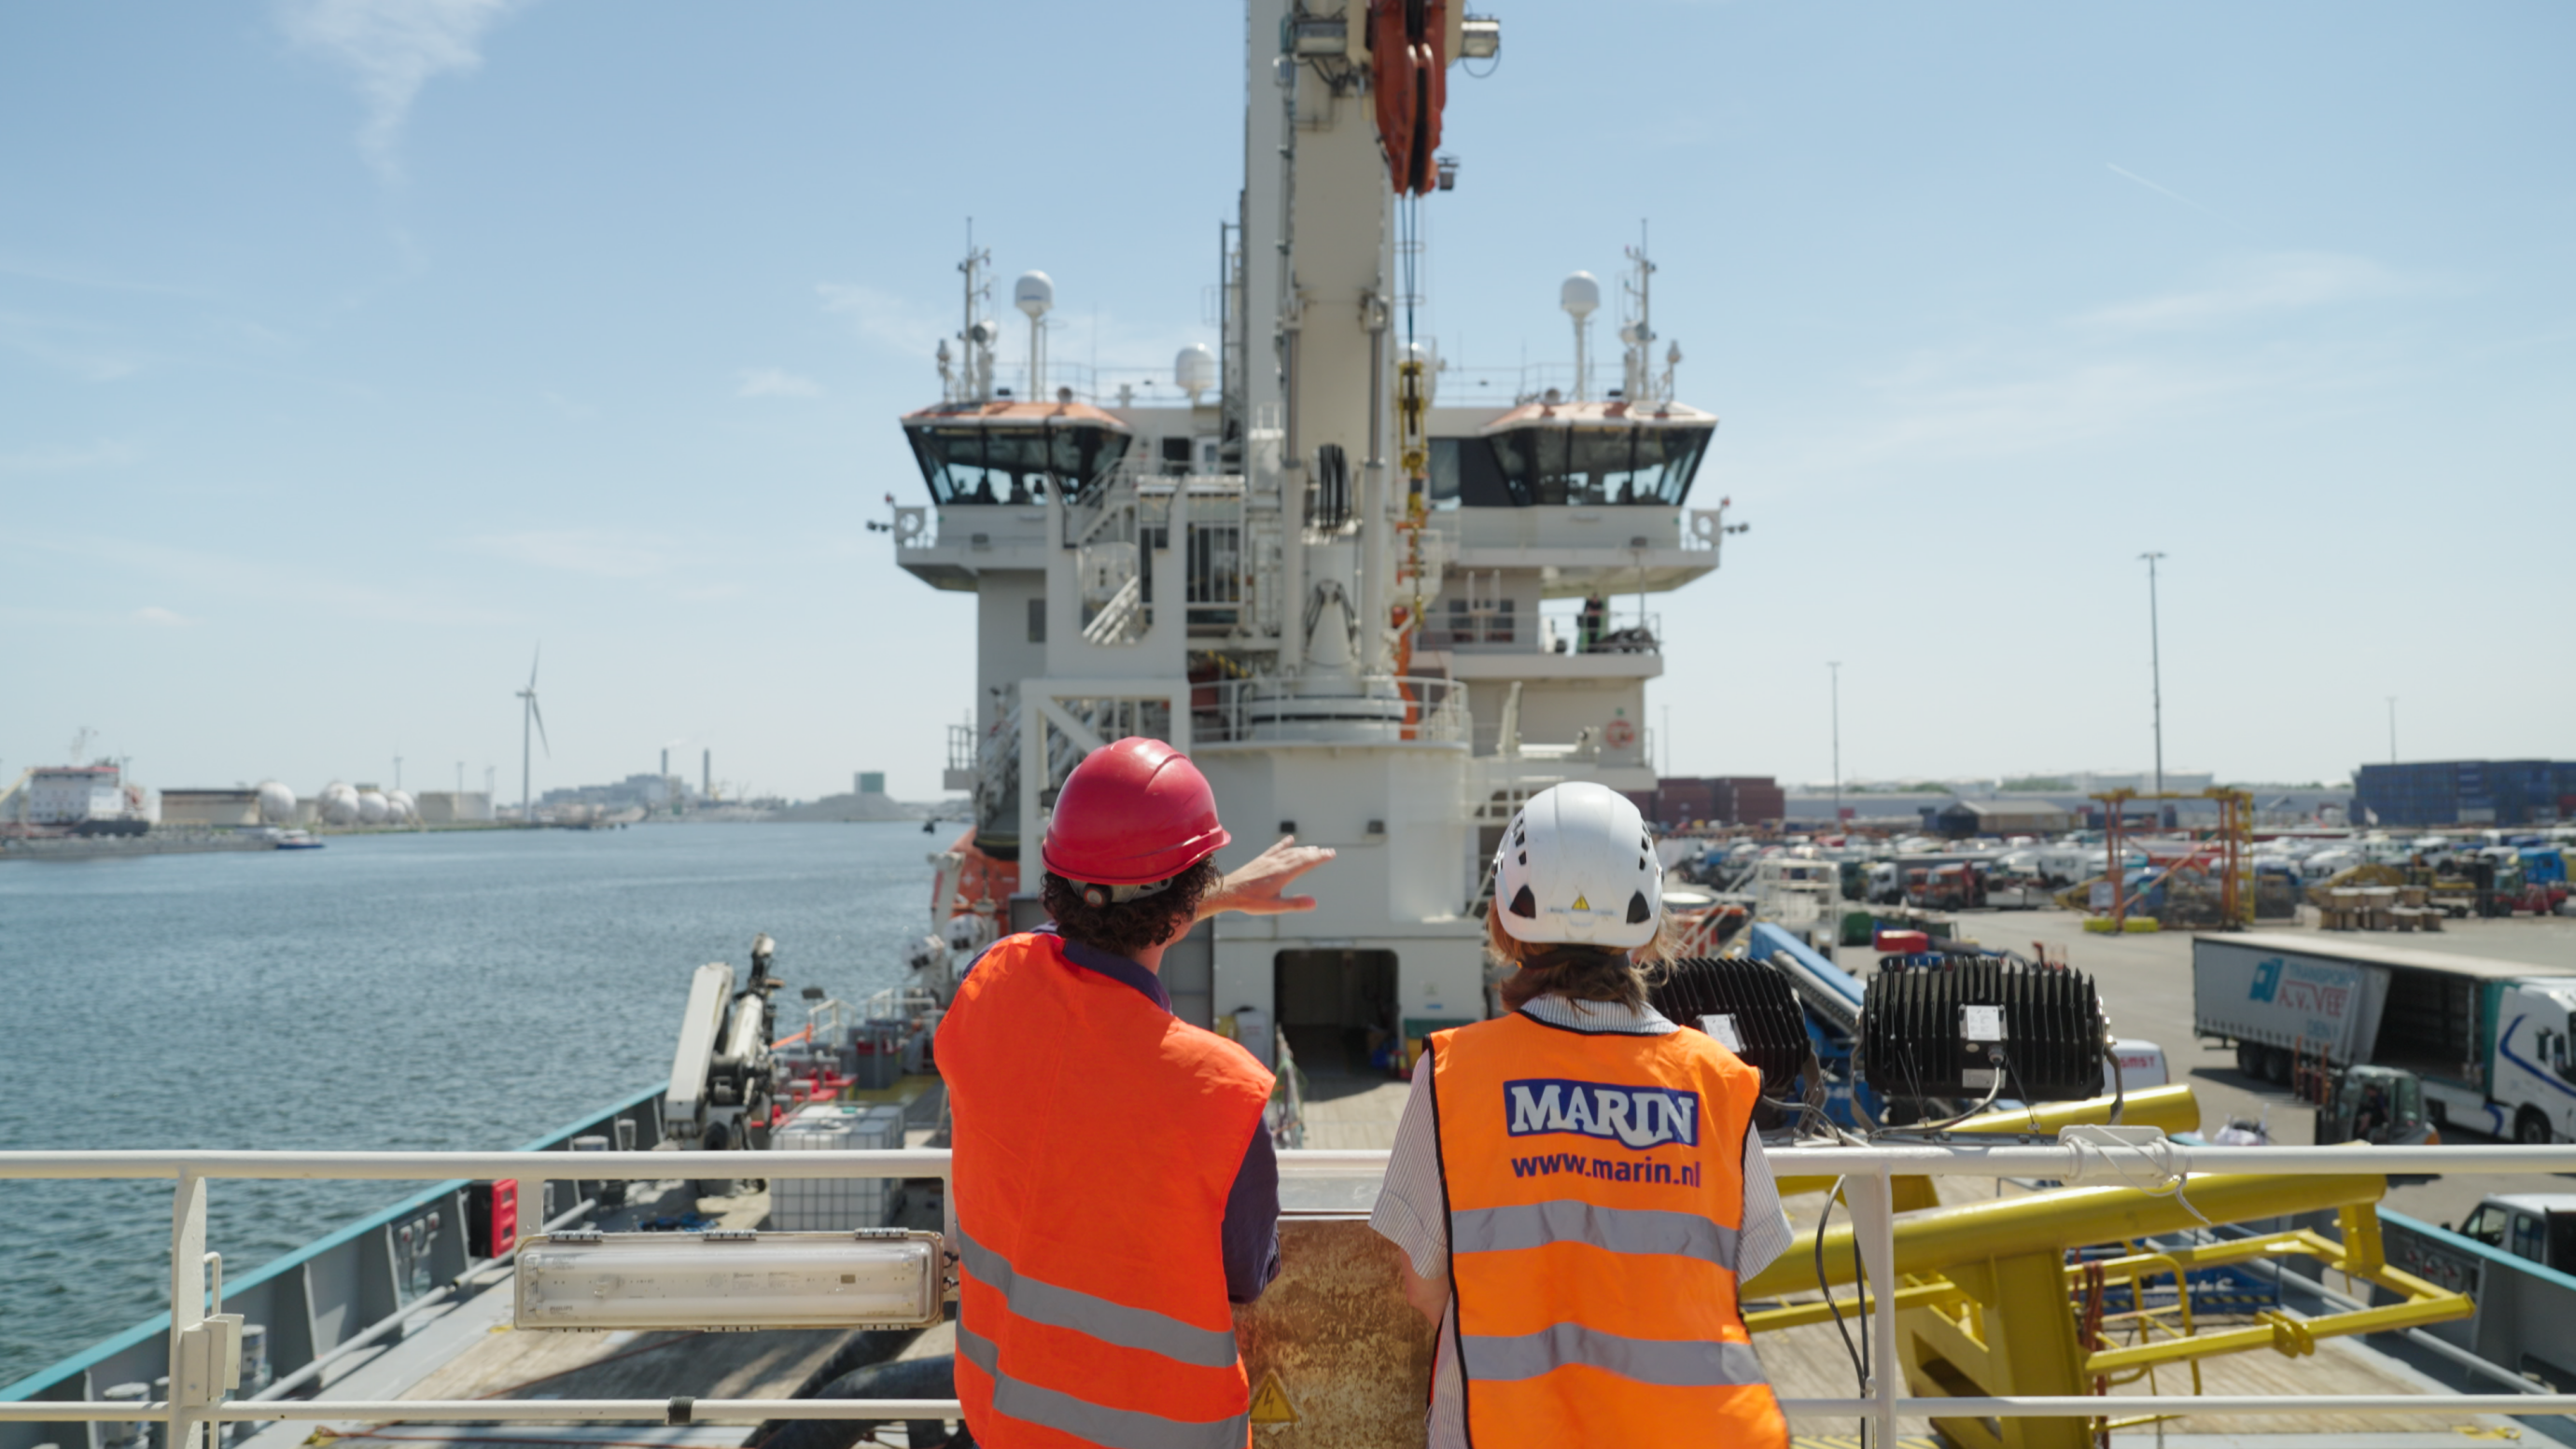 joint development to improve efficiency of offshore wind installation and maintenance